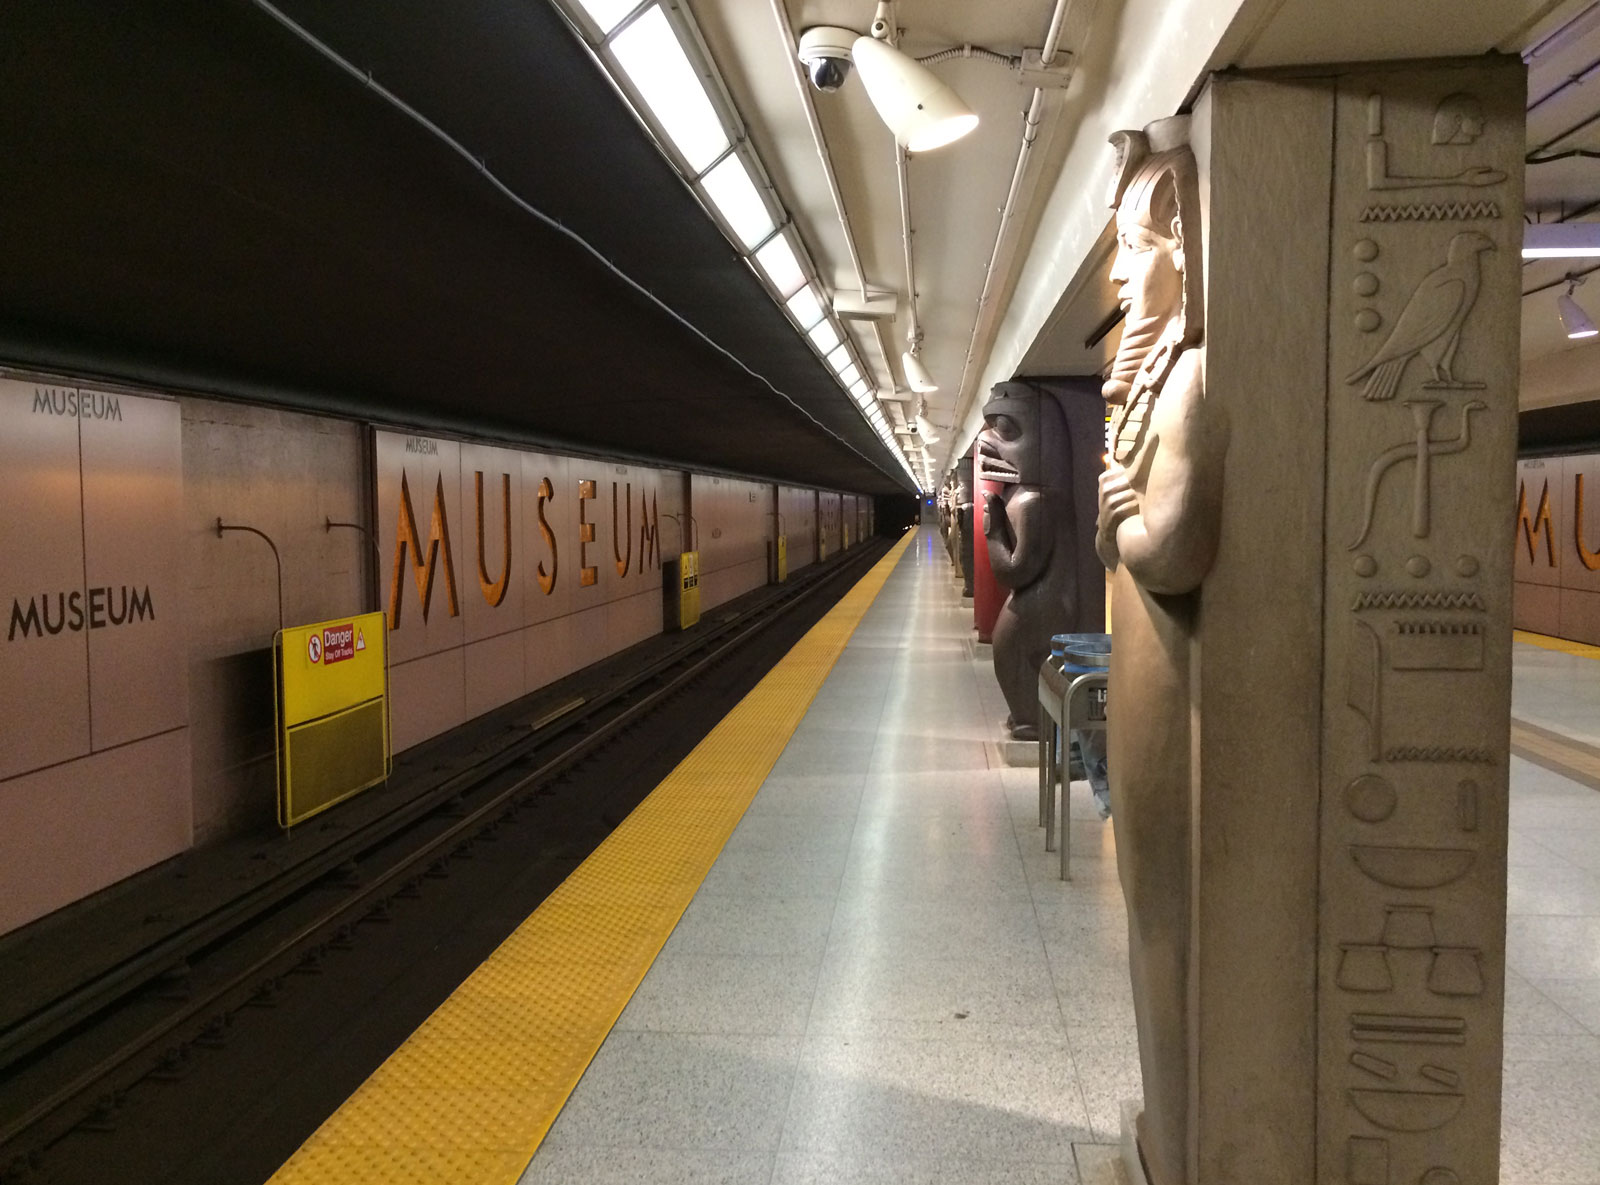 Photo of the sarcophagus and Easter Island-like columns at Museum station in Toronto.